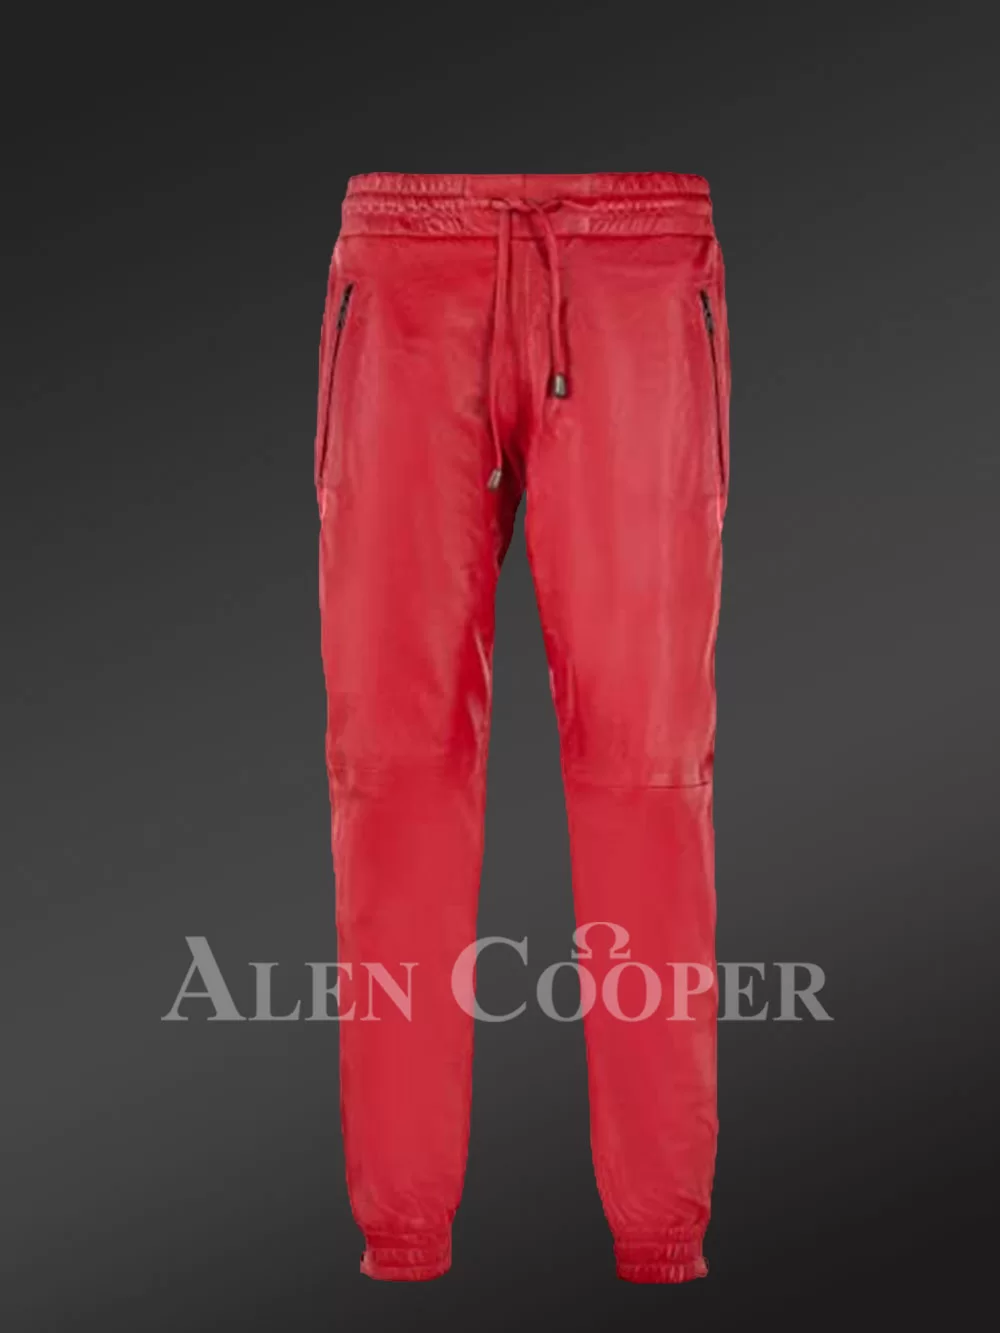 Leather Harem Pants only $95.00 from Aesthetic Noir